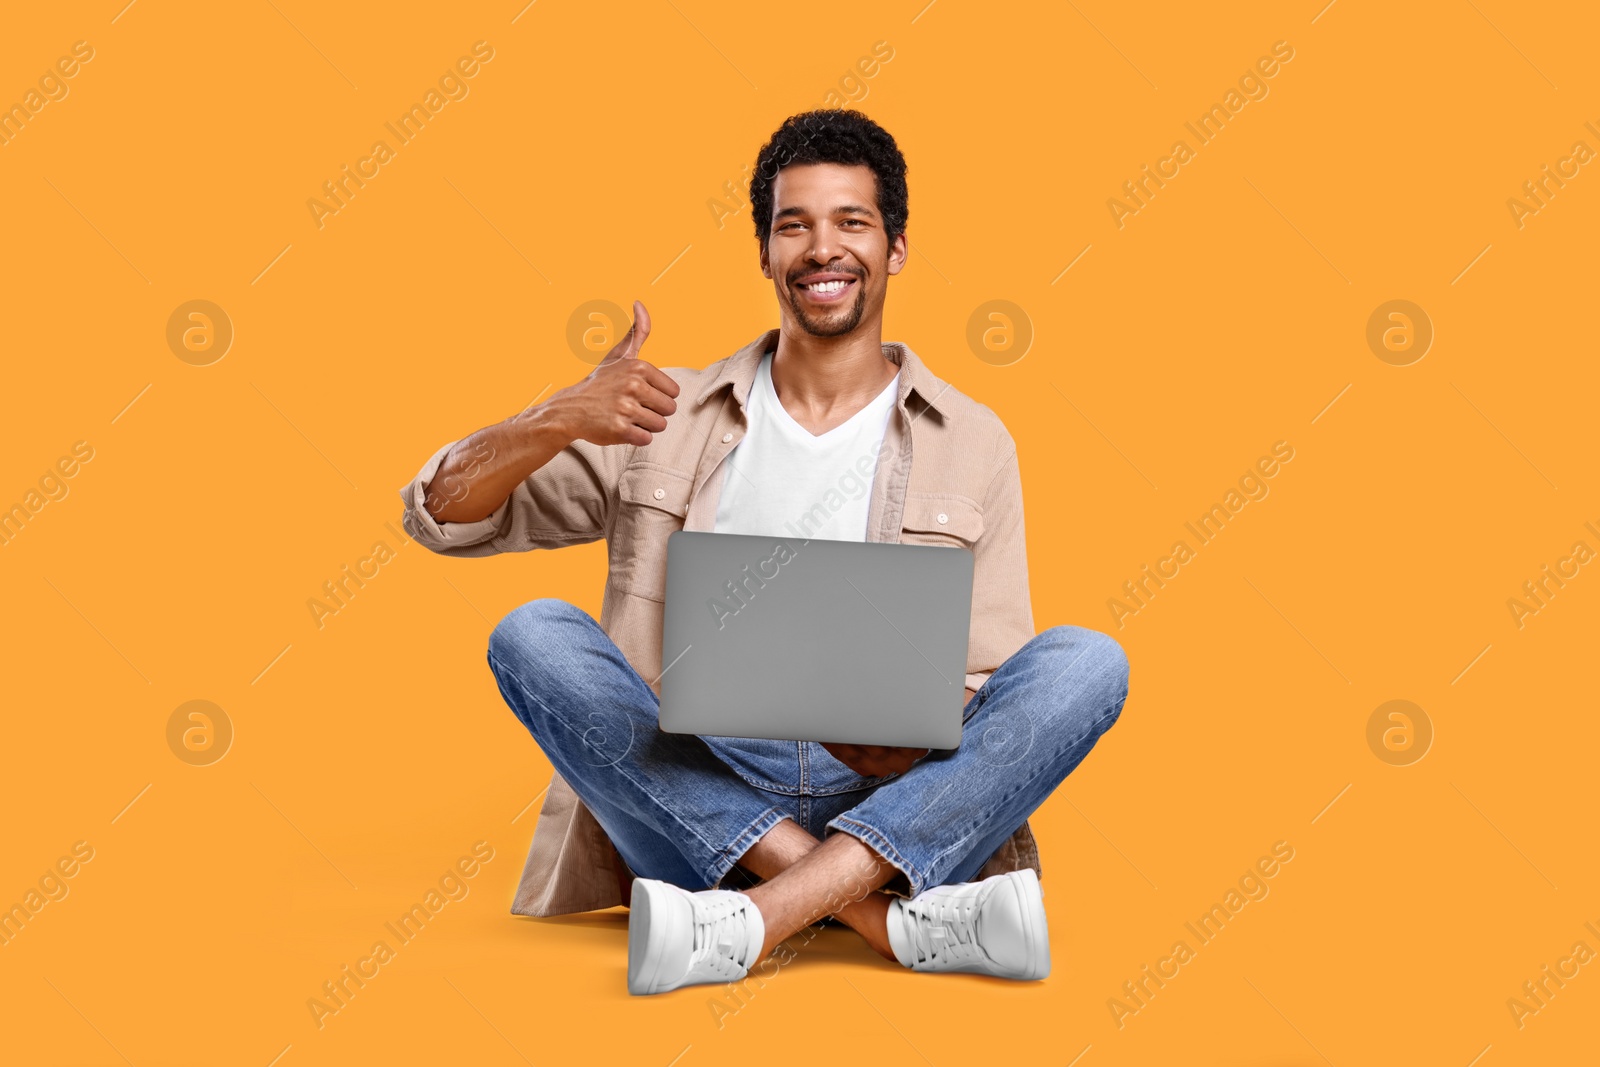 Photo of Happy man with laptop showing thumb up against orange background